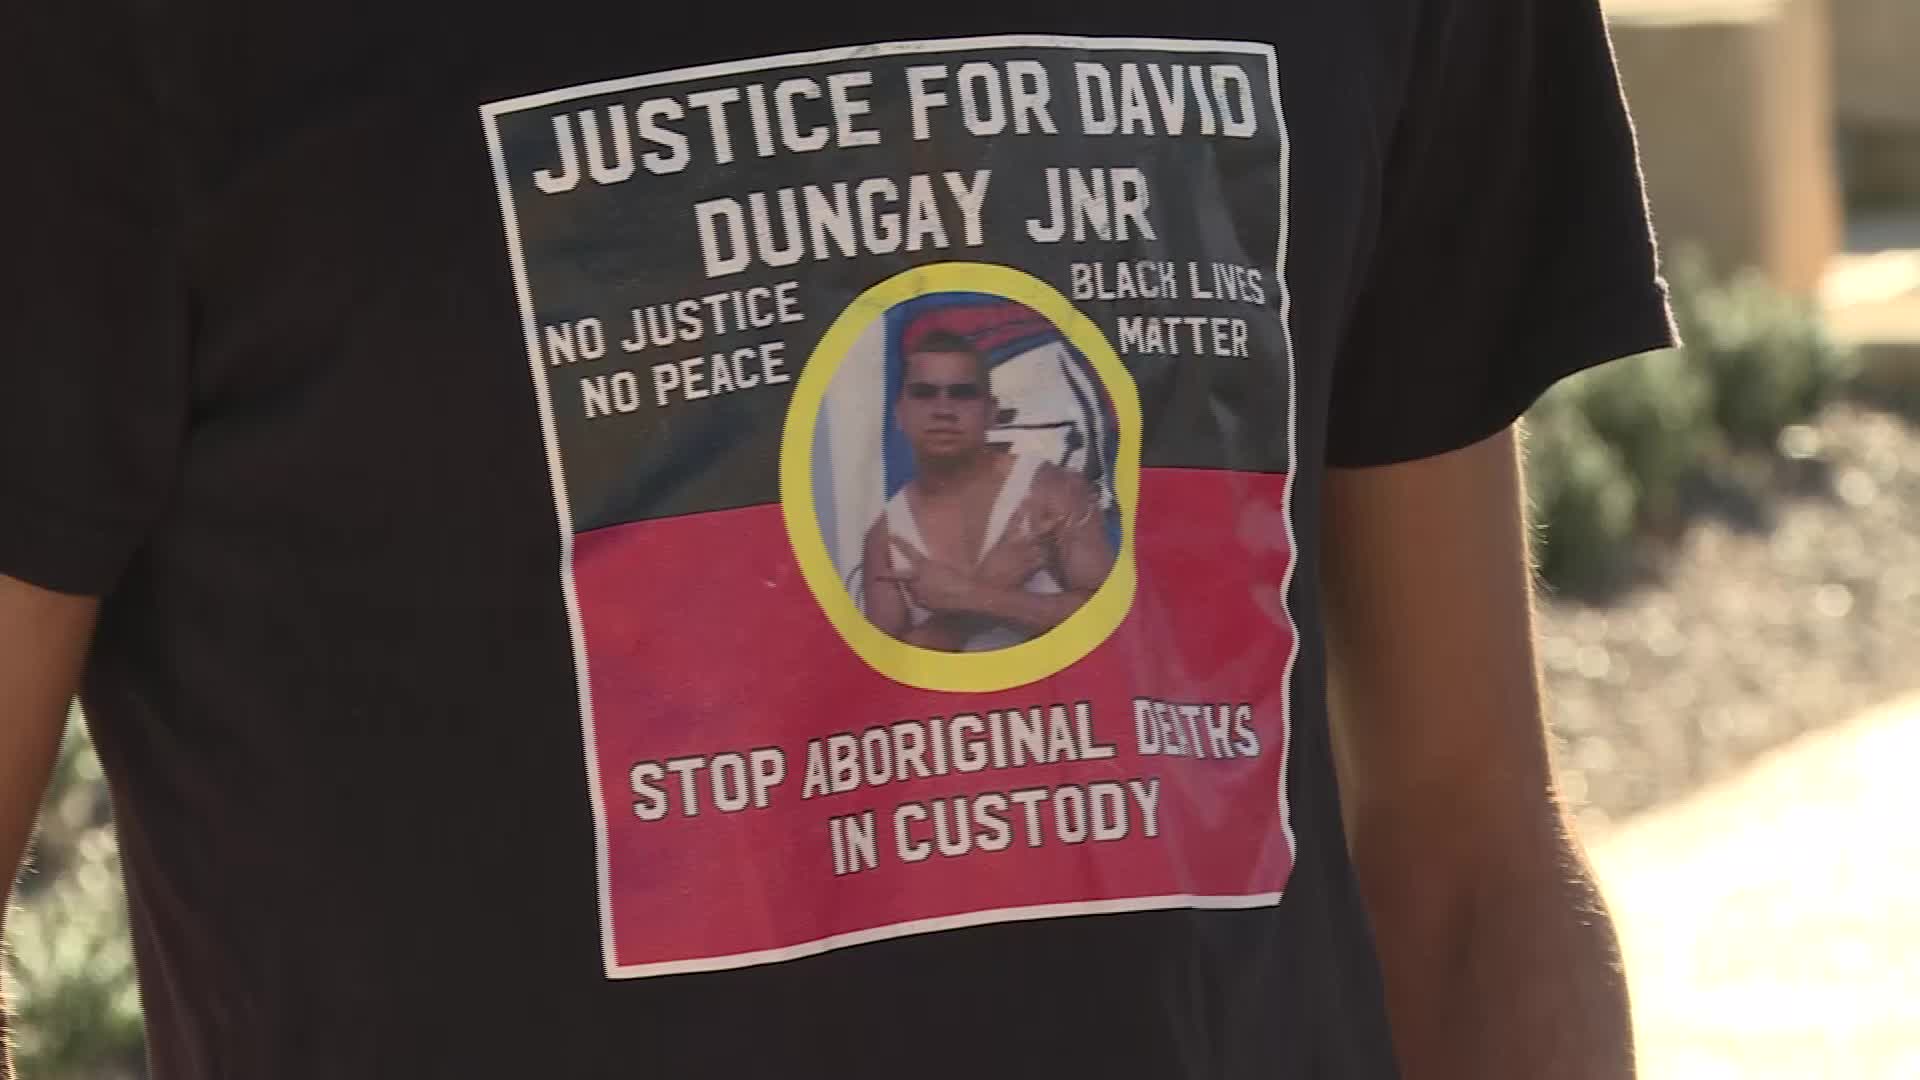 NBN News | THE FAMILY OF DAVID DUNGAY SAYS JUSTICE STILL HASN'T ...